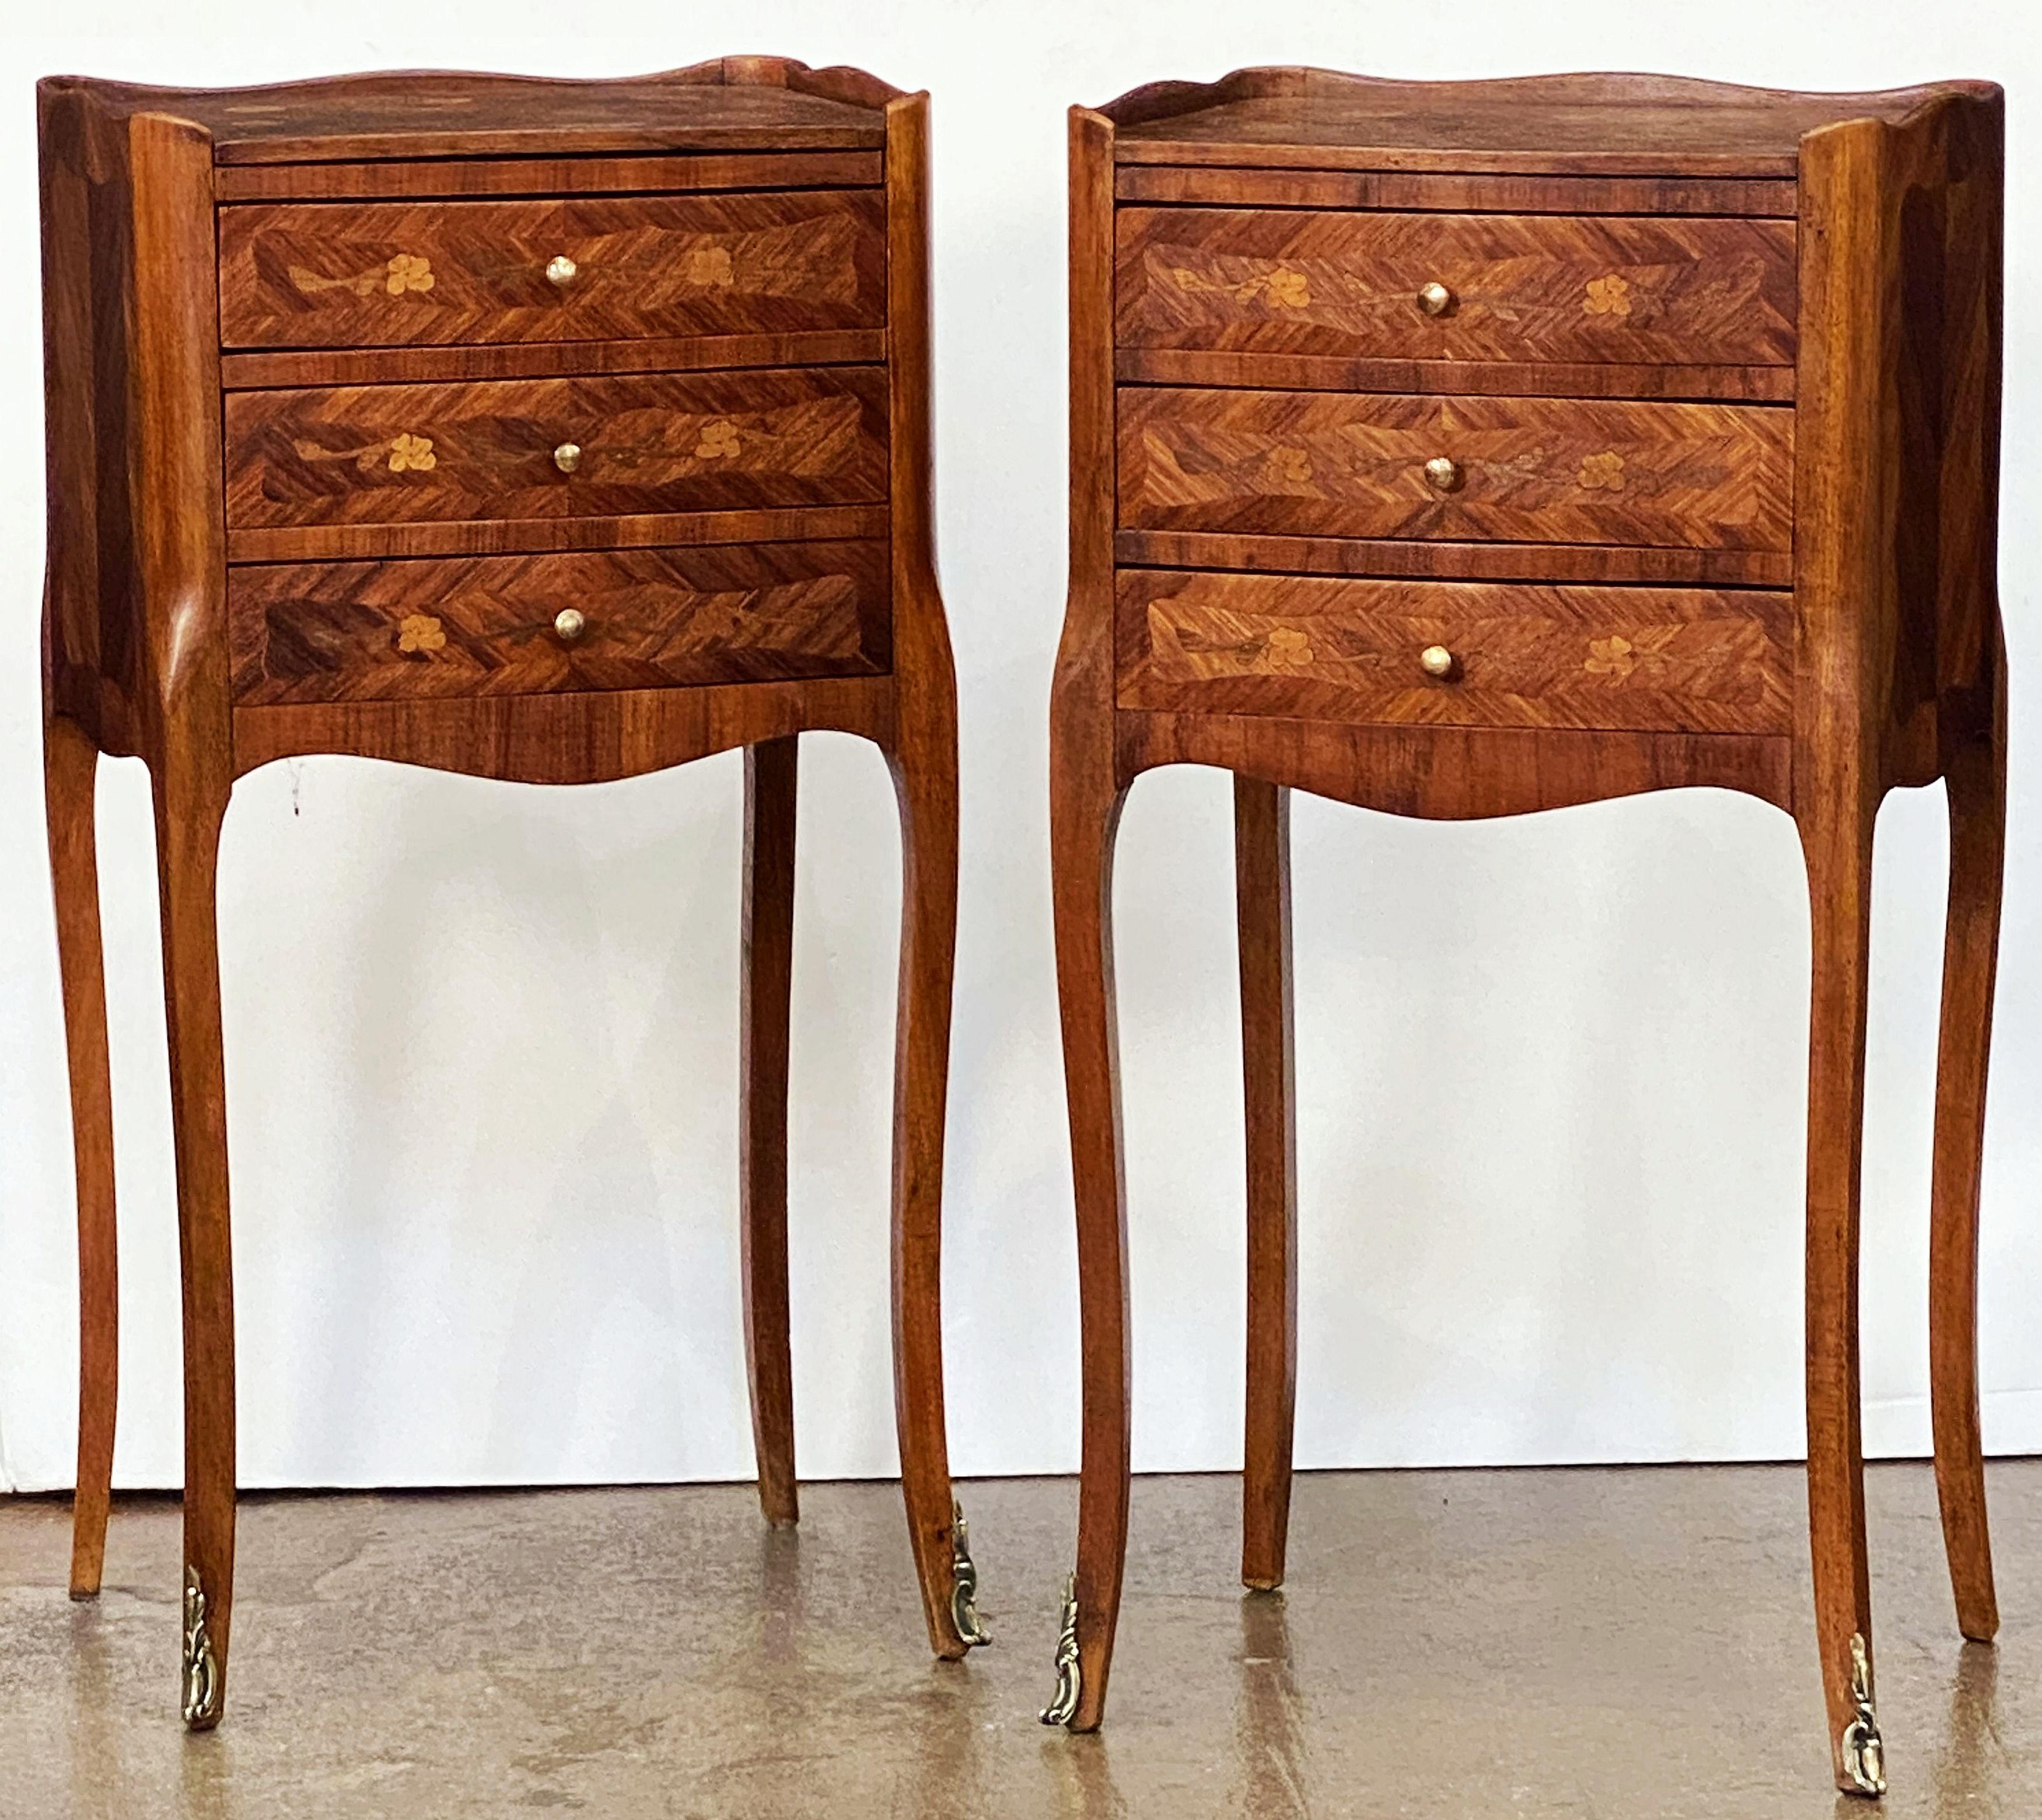 A fine pair of French bedside end tables or nightstands, each stand featuring an inlaid top with serpentine gallery over a frieze of three inlaid drawers with brass pulls, marquetry sides and apron bottom, and set upon four cabriole legs with ormolu